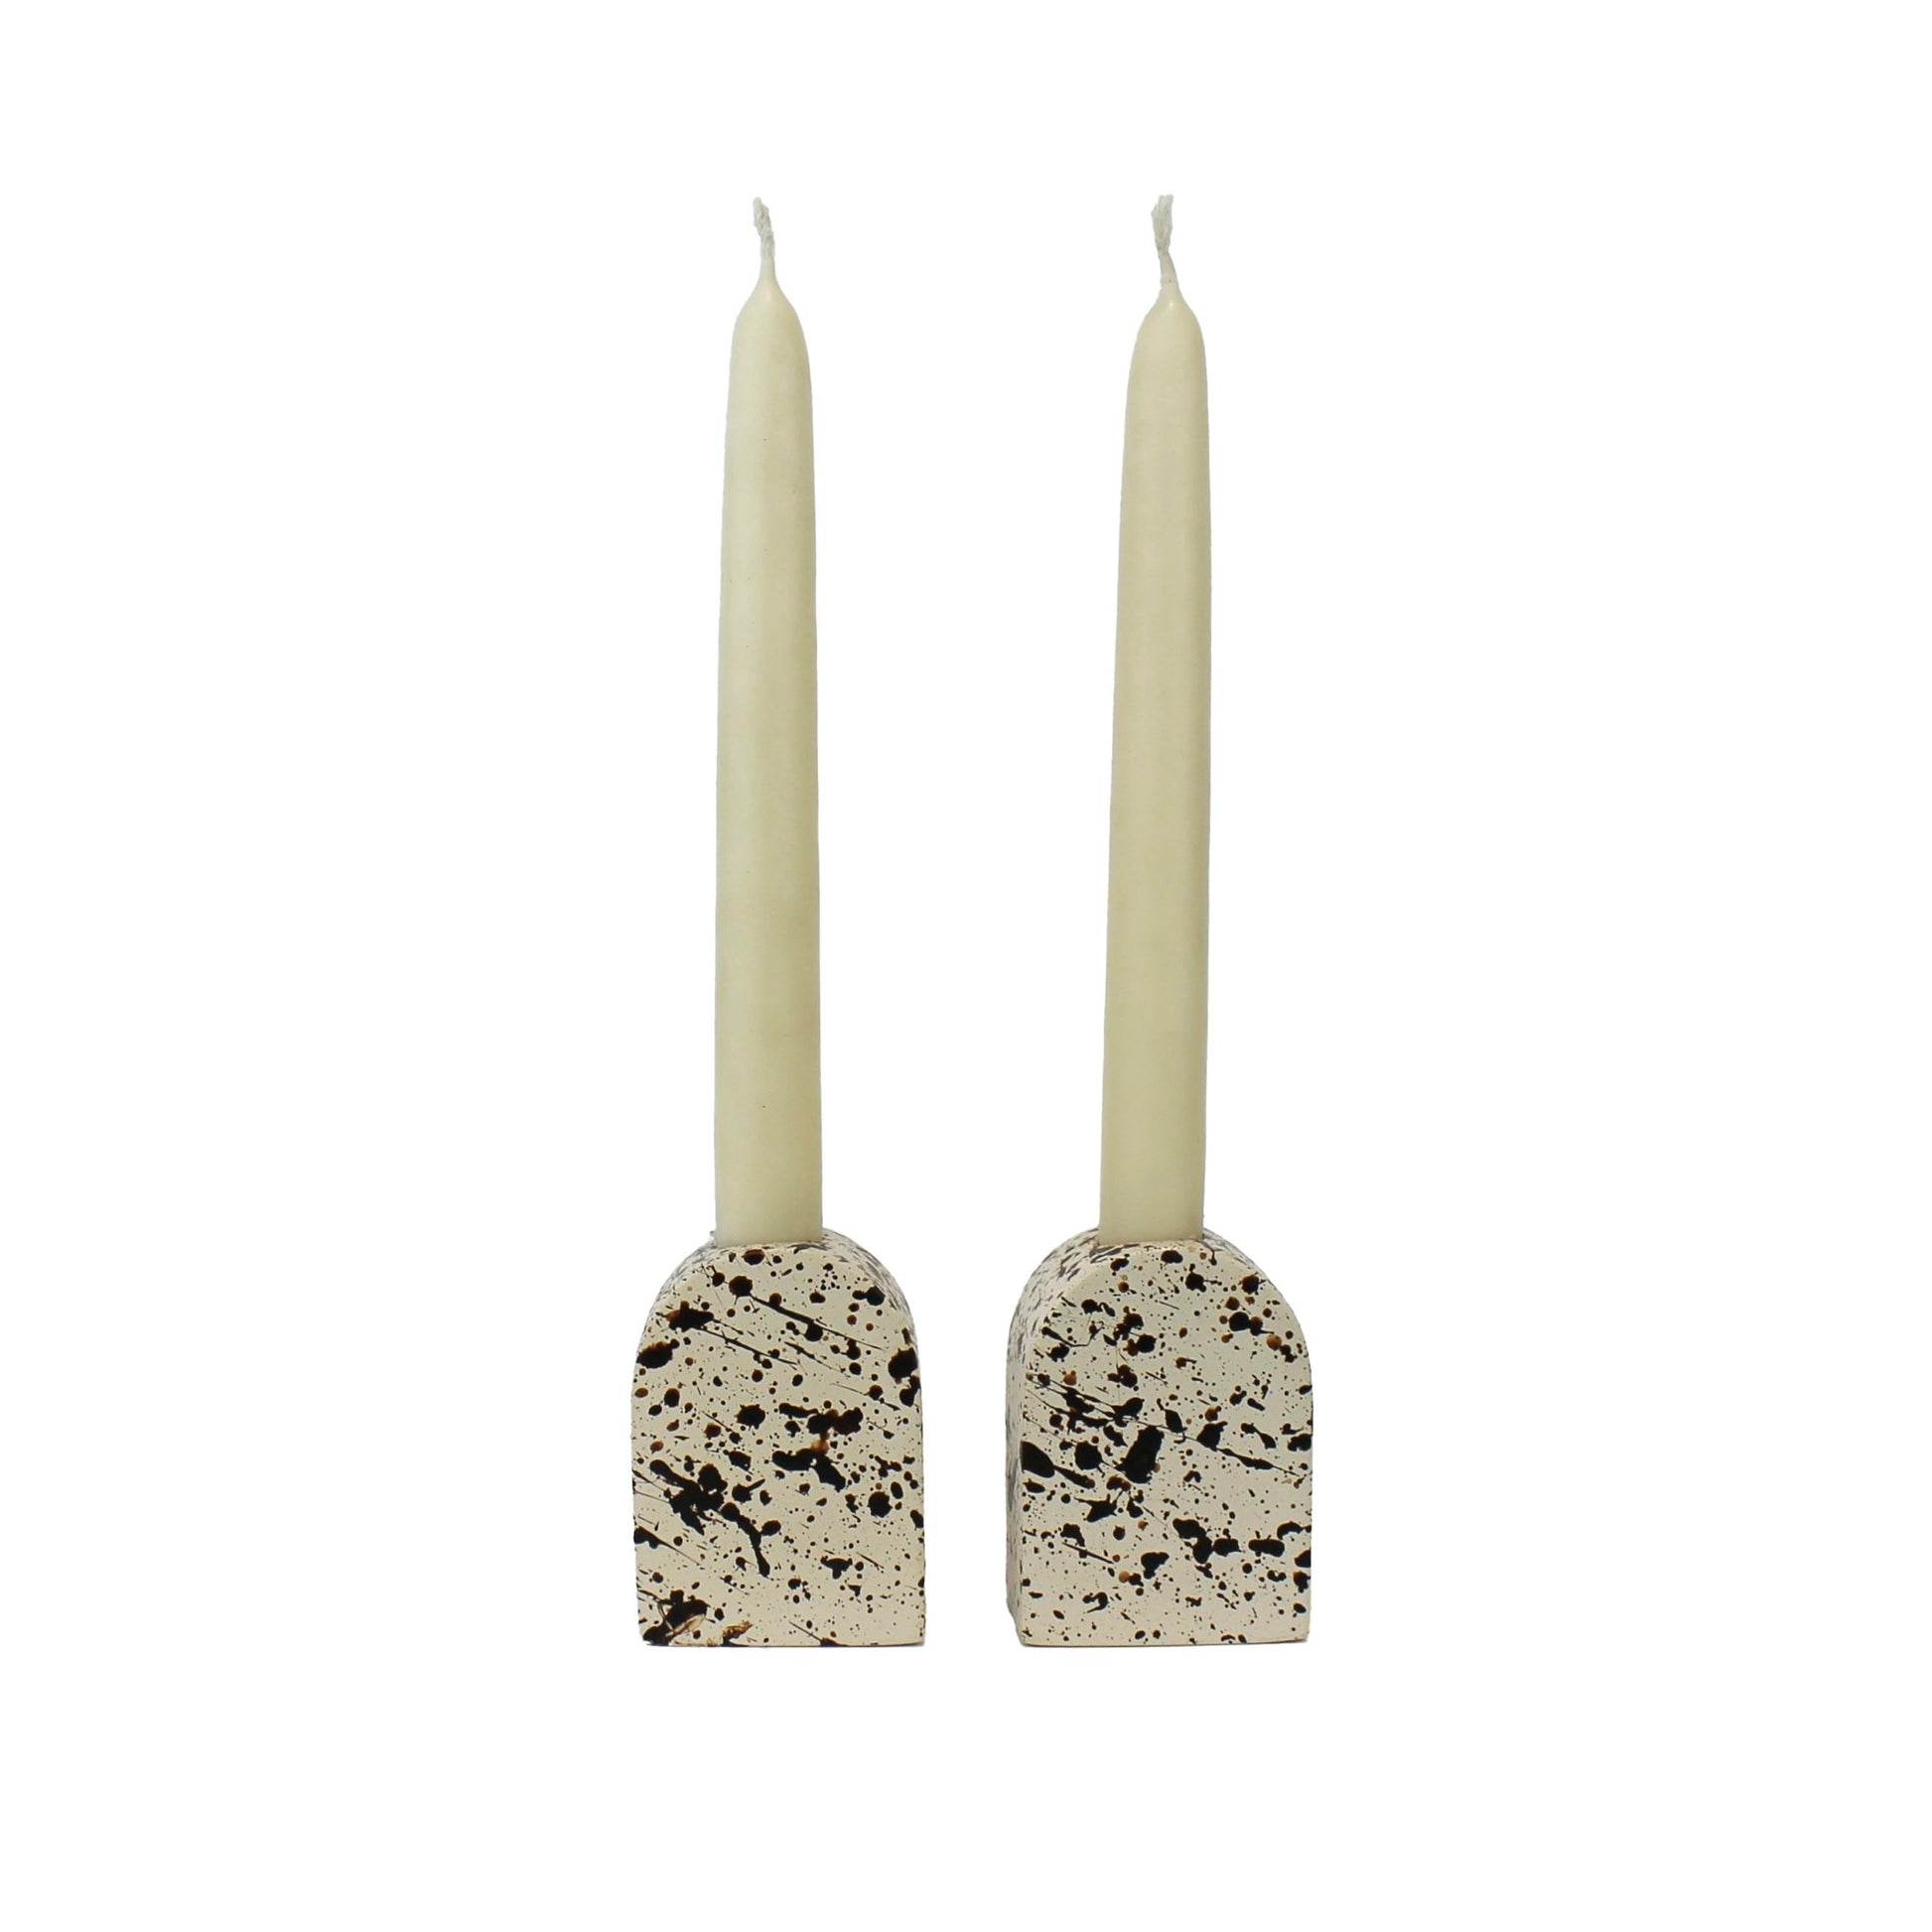 Brown and Cream Splattered Pattern Large Arch Shaped Concrete Candle Holder